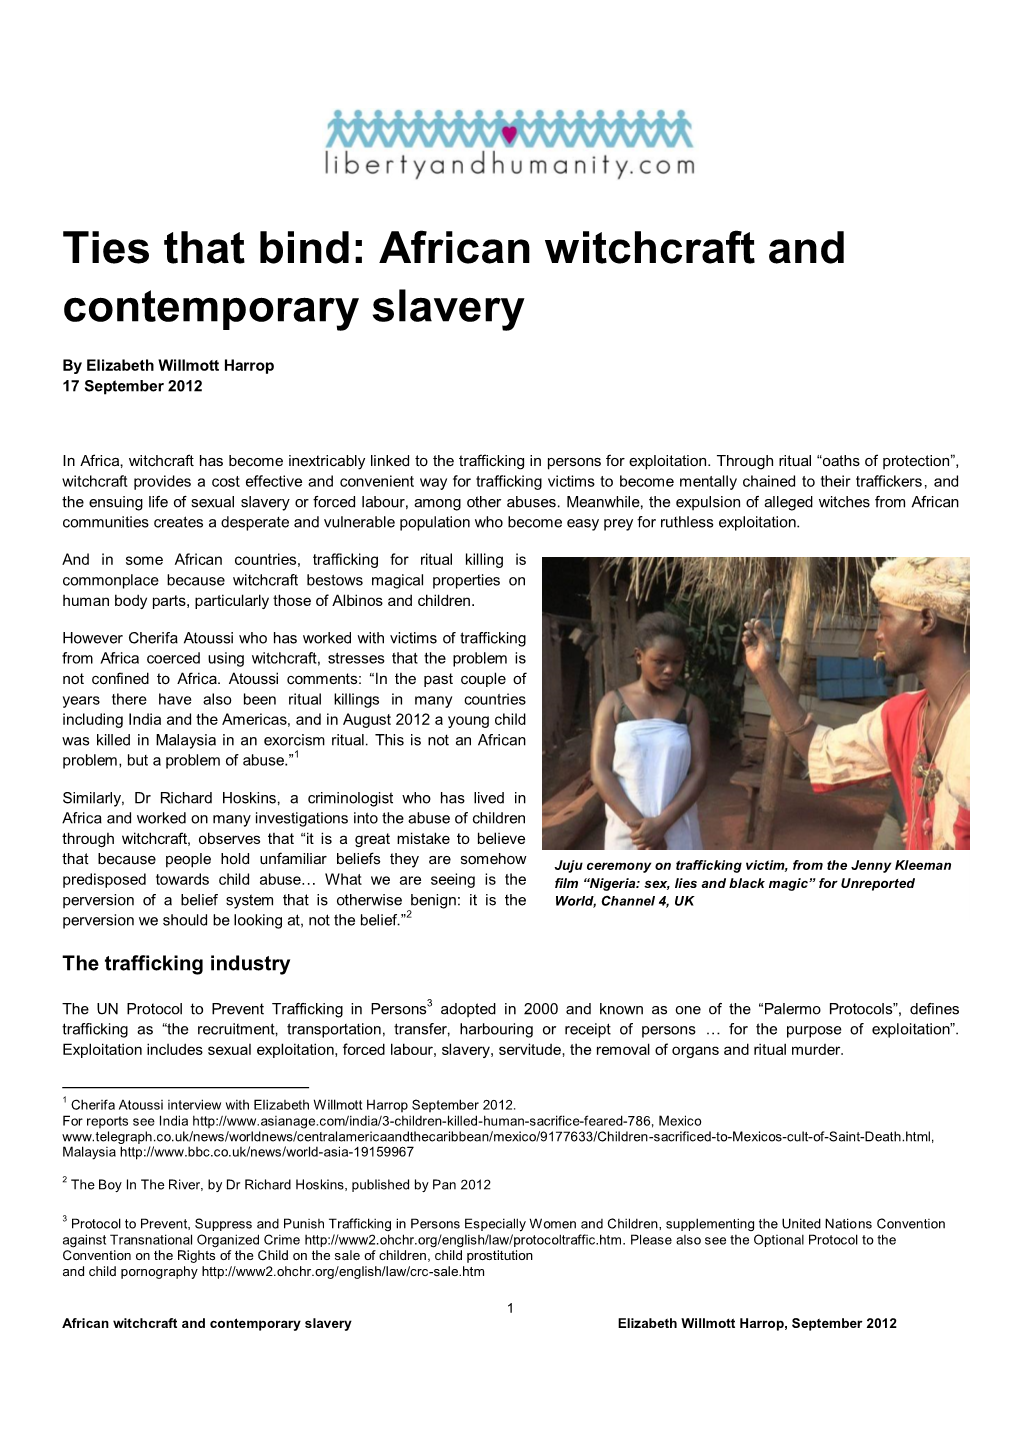 Ties That Bind: African Witchcraft and Contemporary Slavery